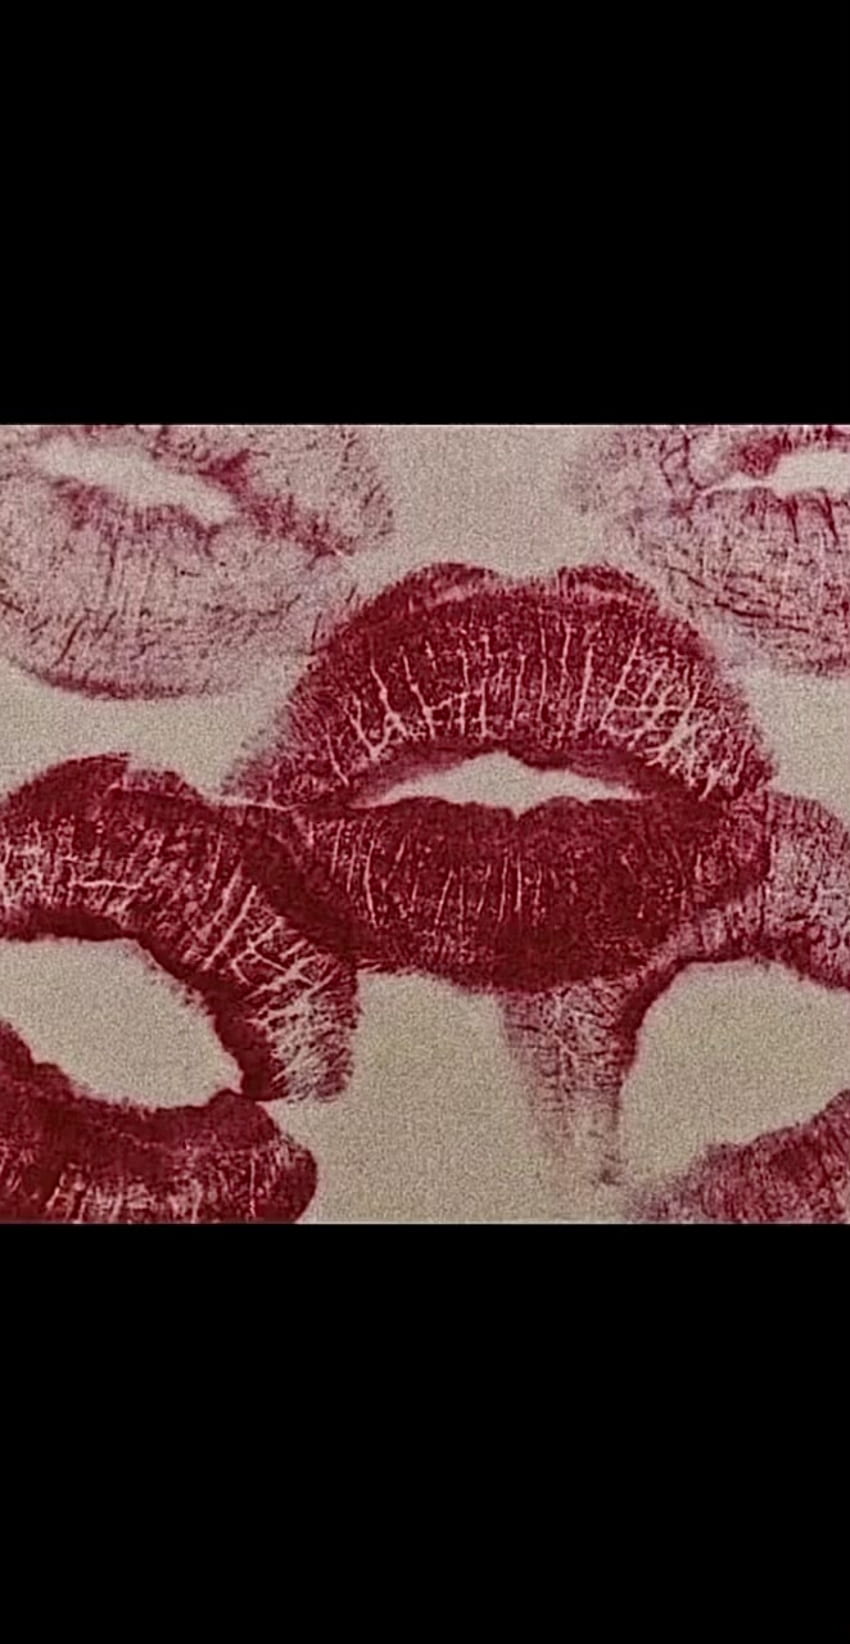 A close up of a piece of fabric with a design of red lips on it. - Lips